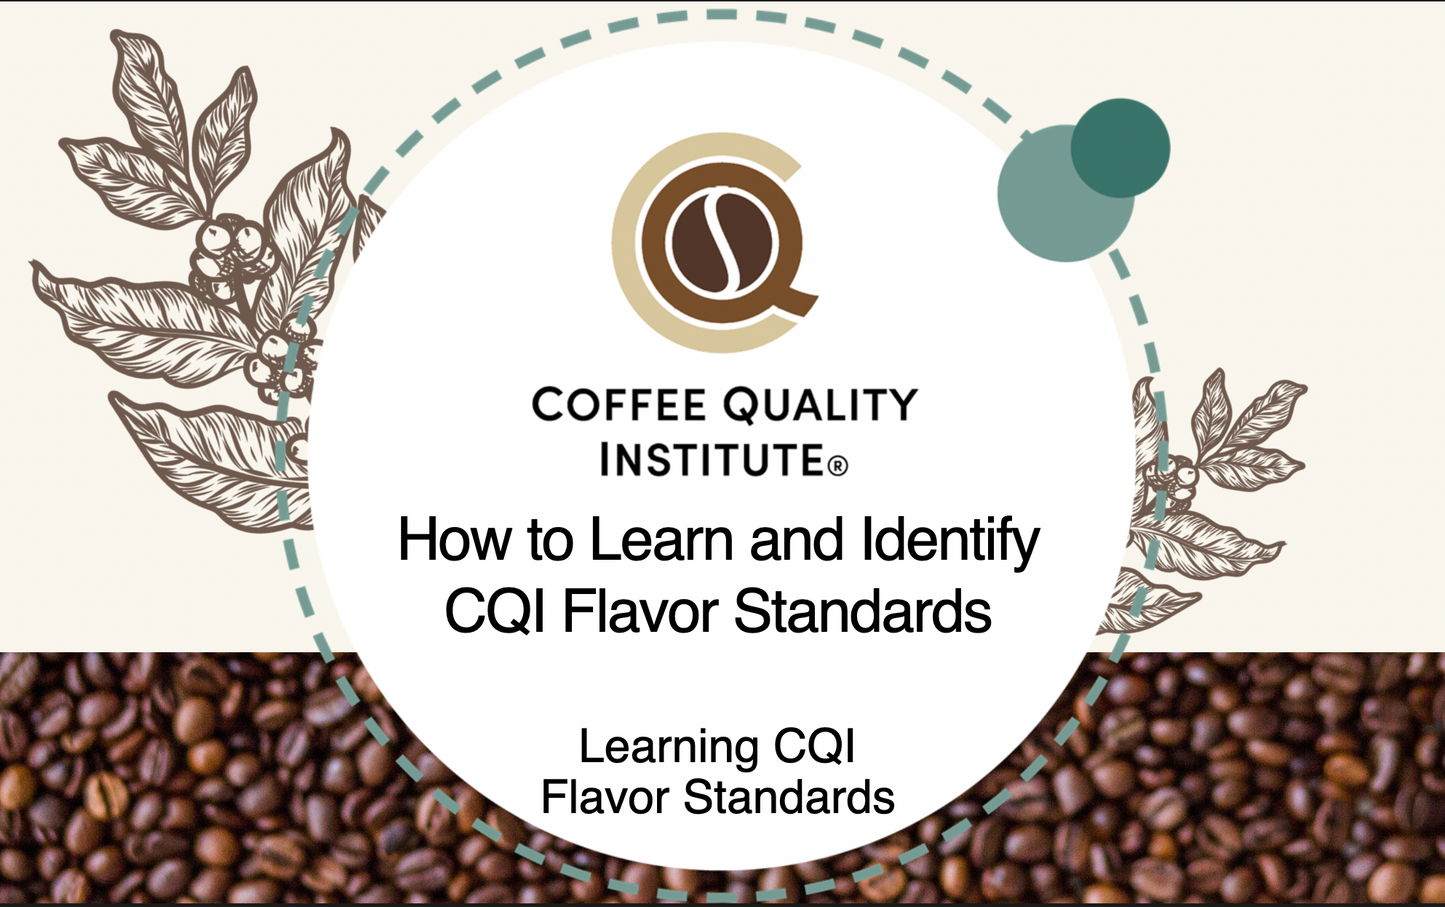 Learning CQI Flavor Standards